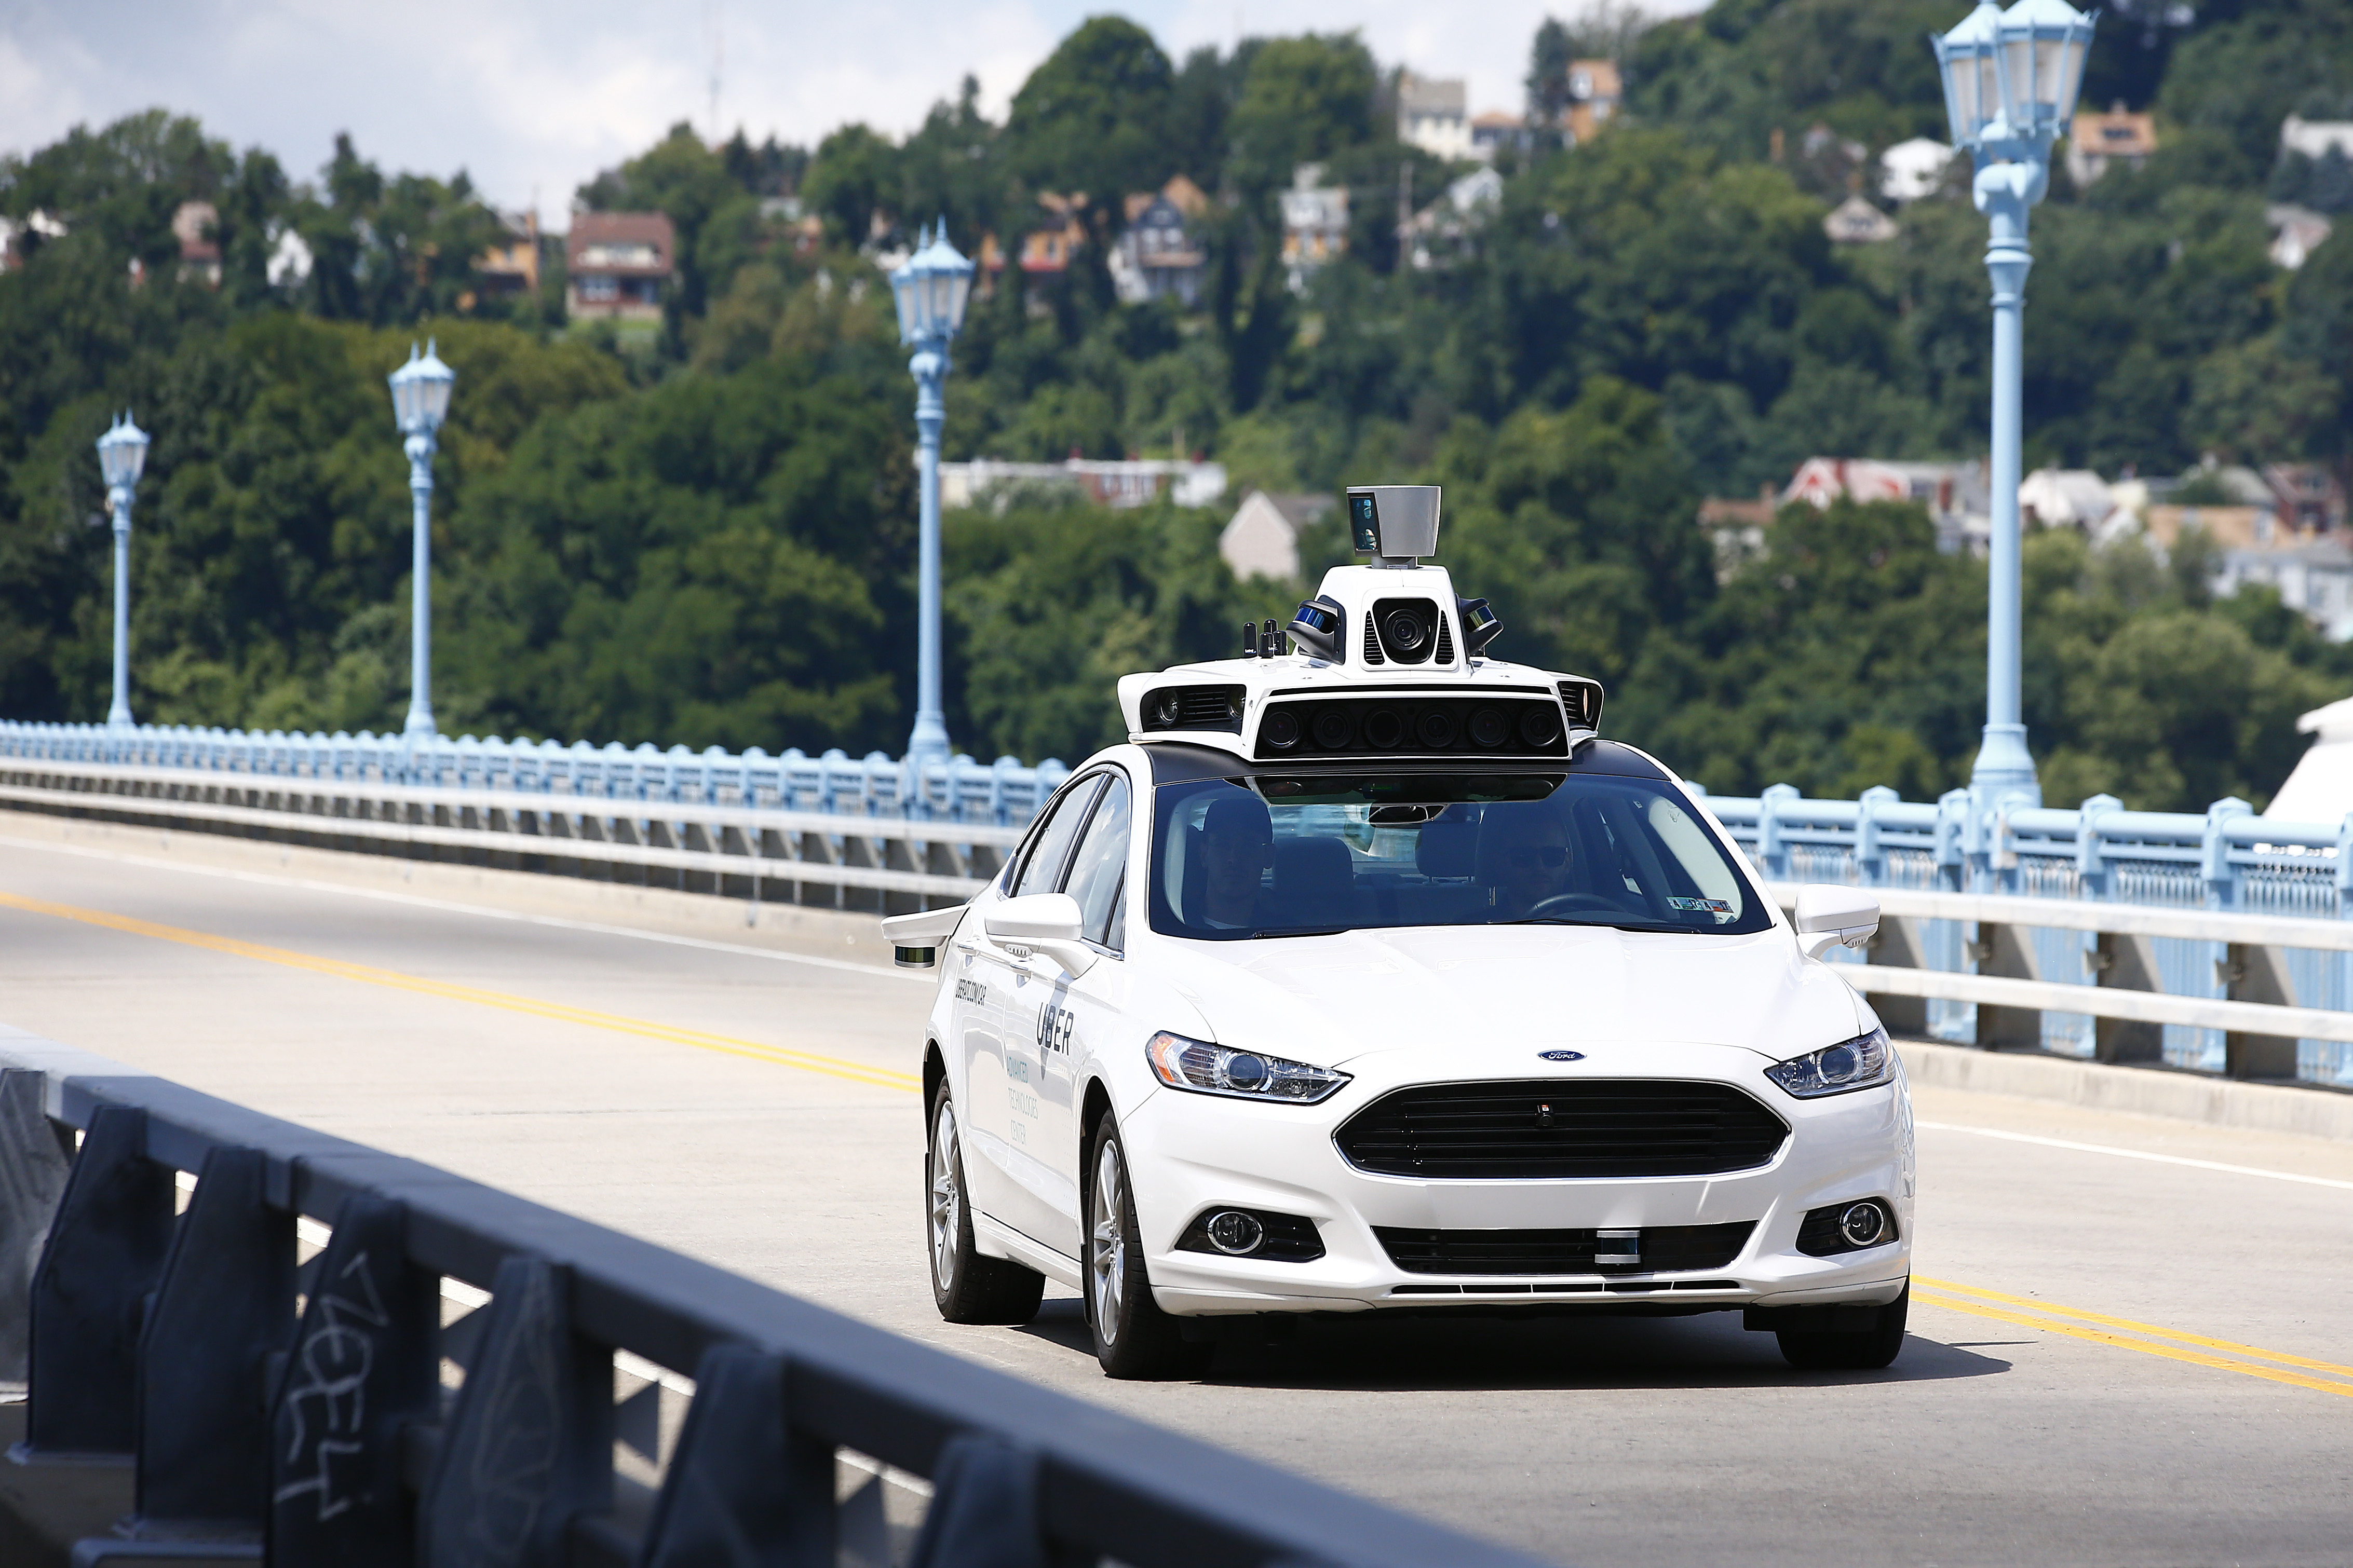 Pittsburgh residents will get the opportunity to experience driverless Uber rides first.